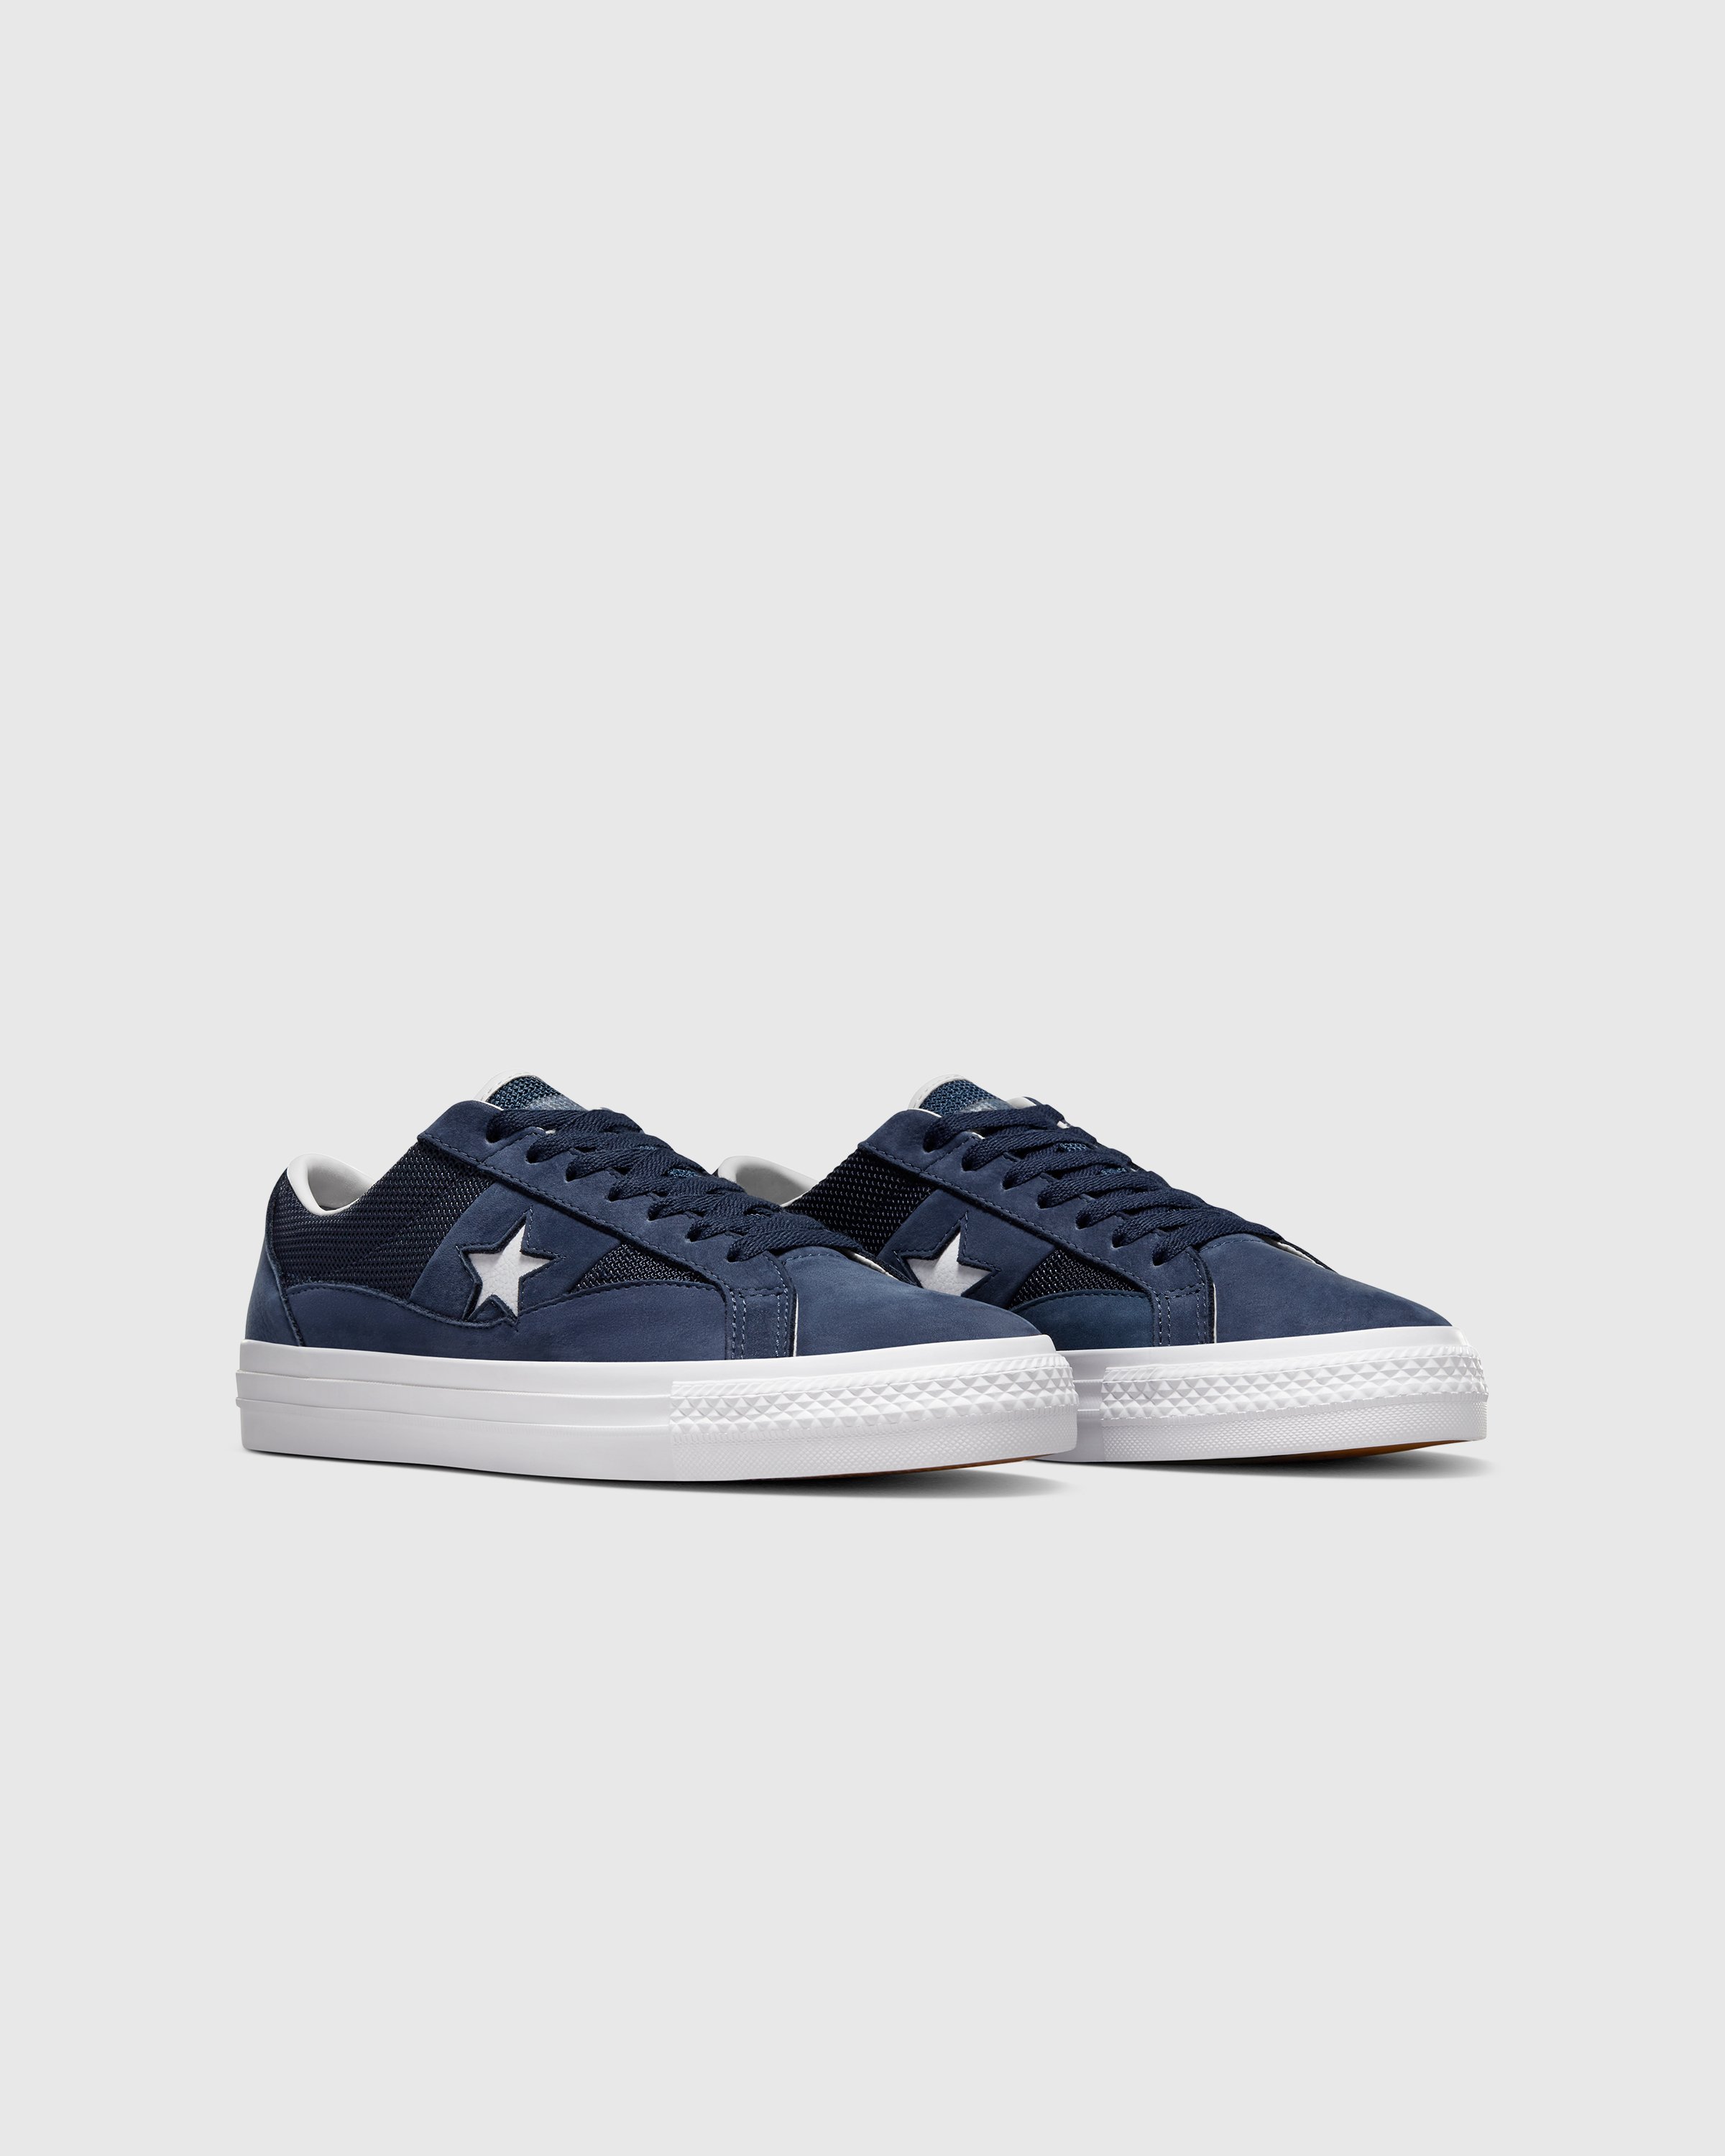 Converse - CONS x Alltimers ONE STAR PRO OX Midnight Navy/Navy - Footwear - Blue - Image 3